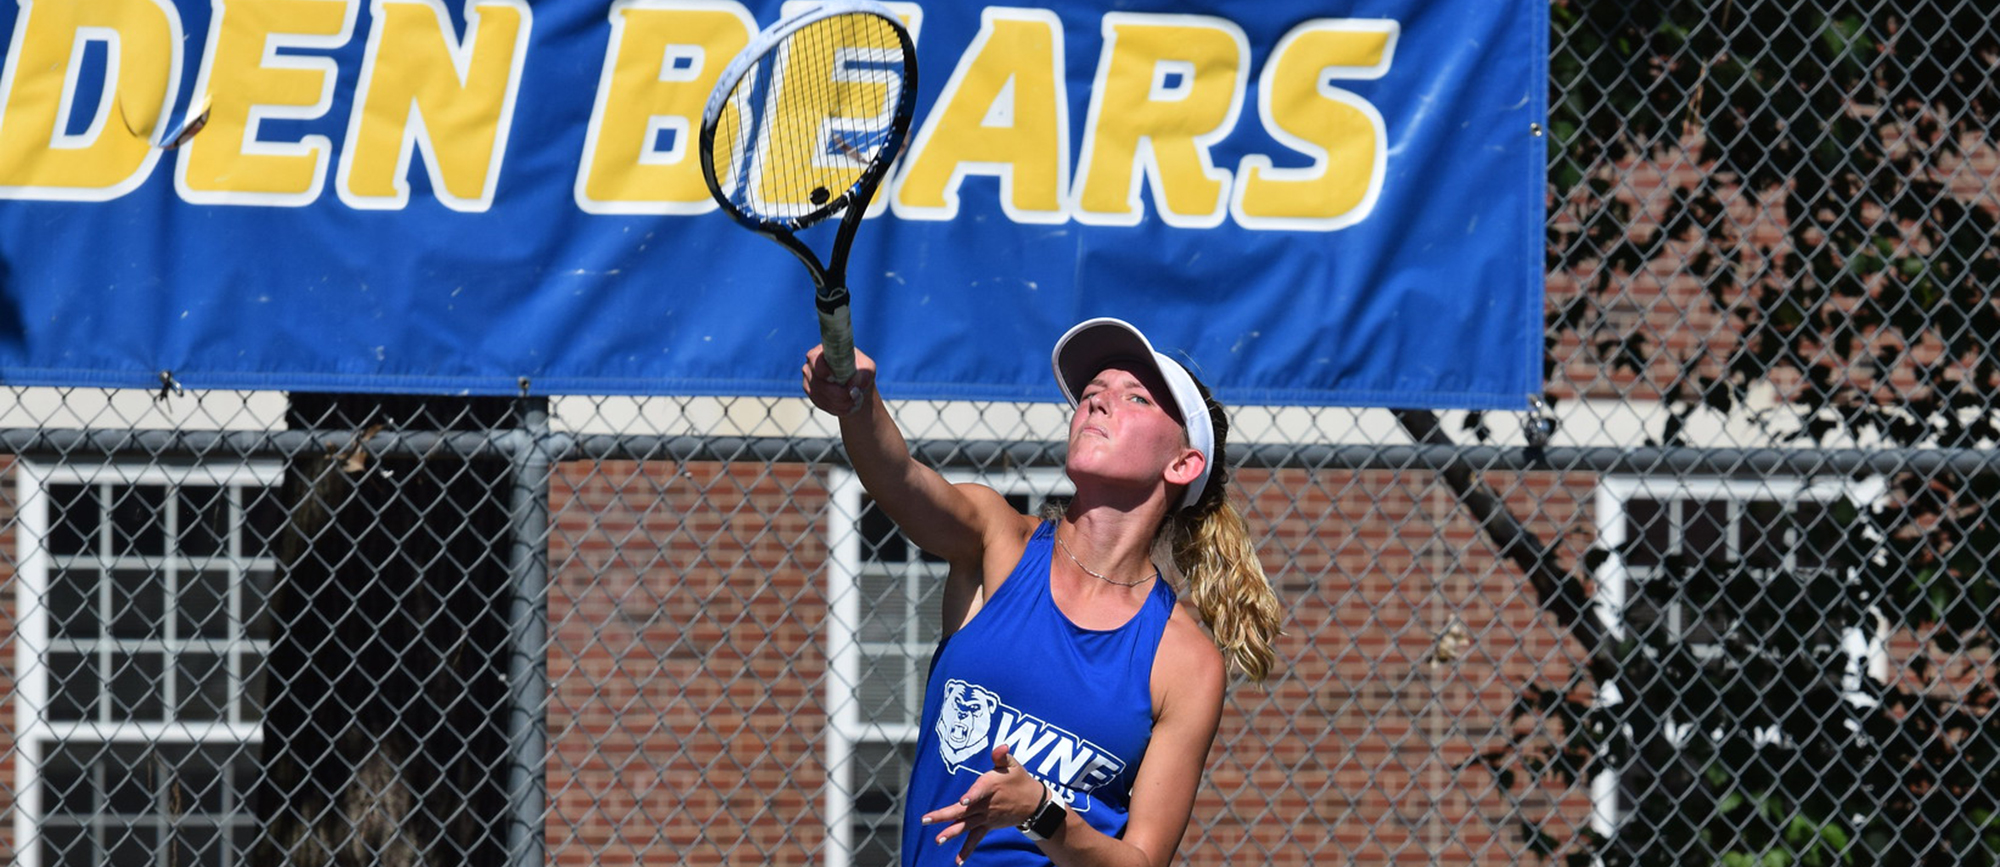 Morgan Schrader picked up wins at both No. 1 doubles and No. 2 singles on Saturday as the Golden Bears edged Salve Regina, 5-4. (Photo by Rachael Margossian)